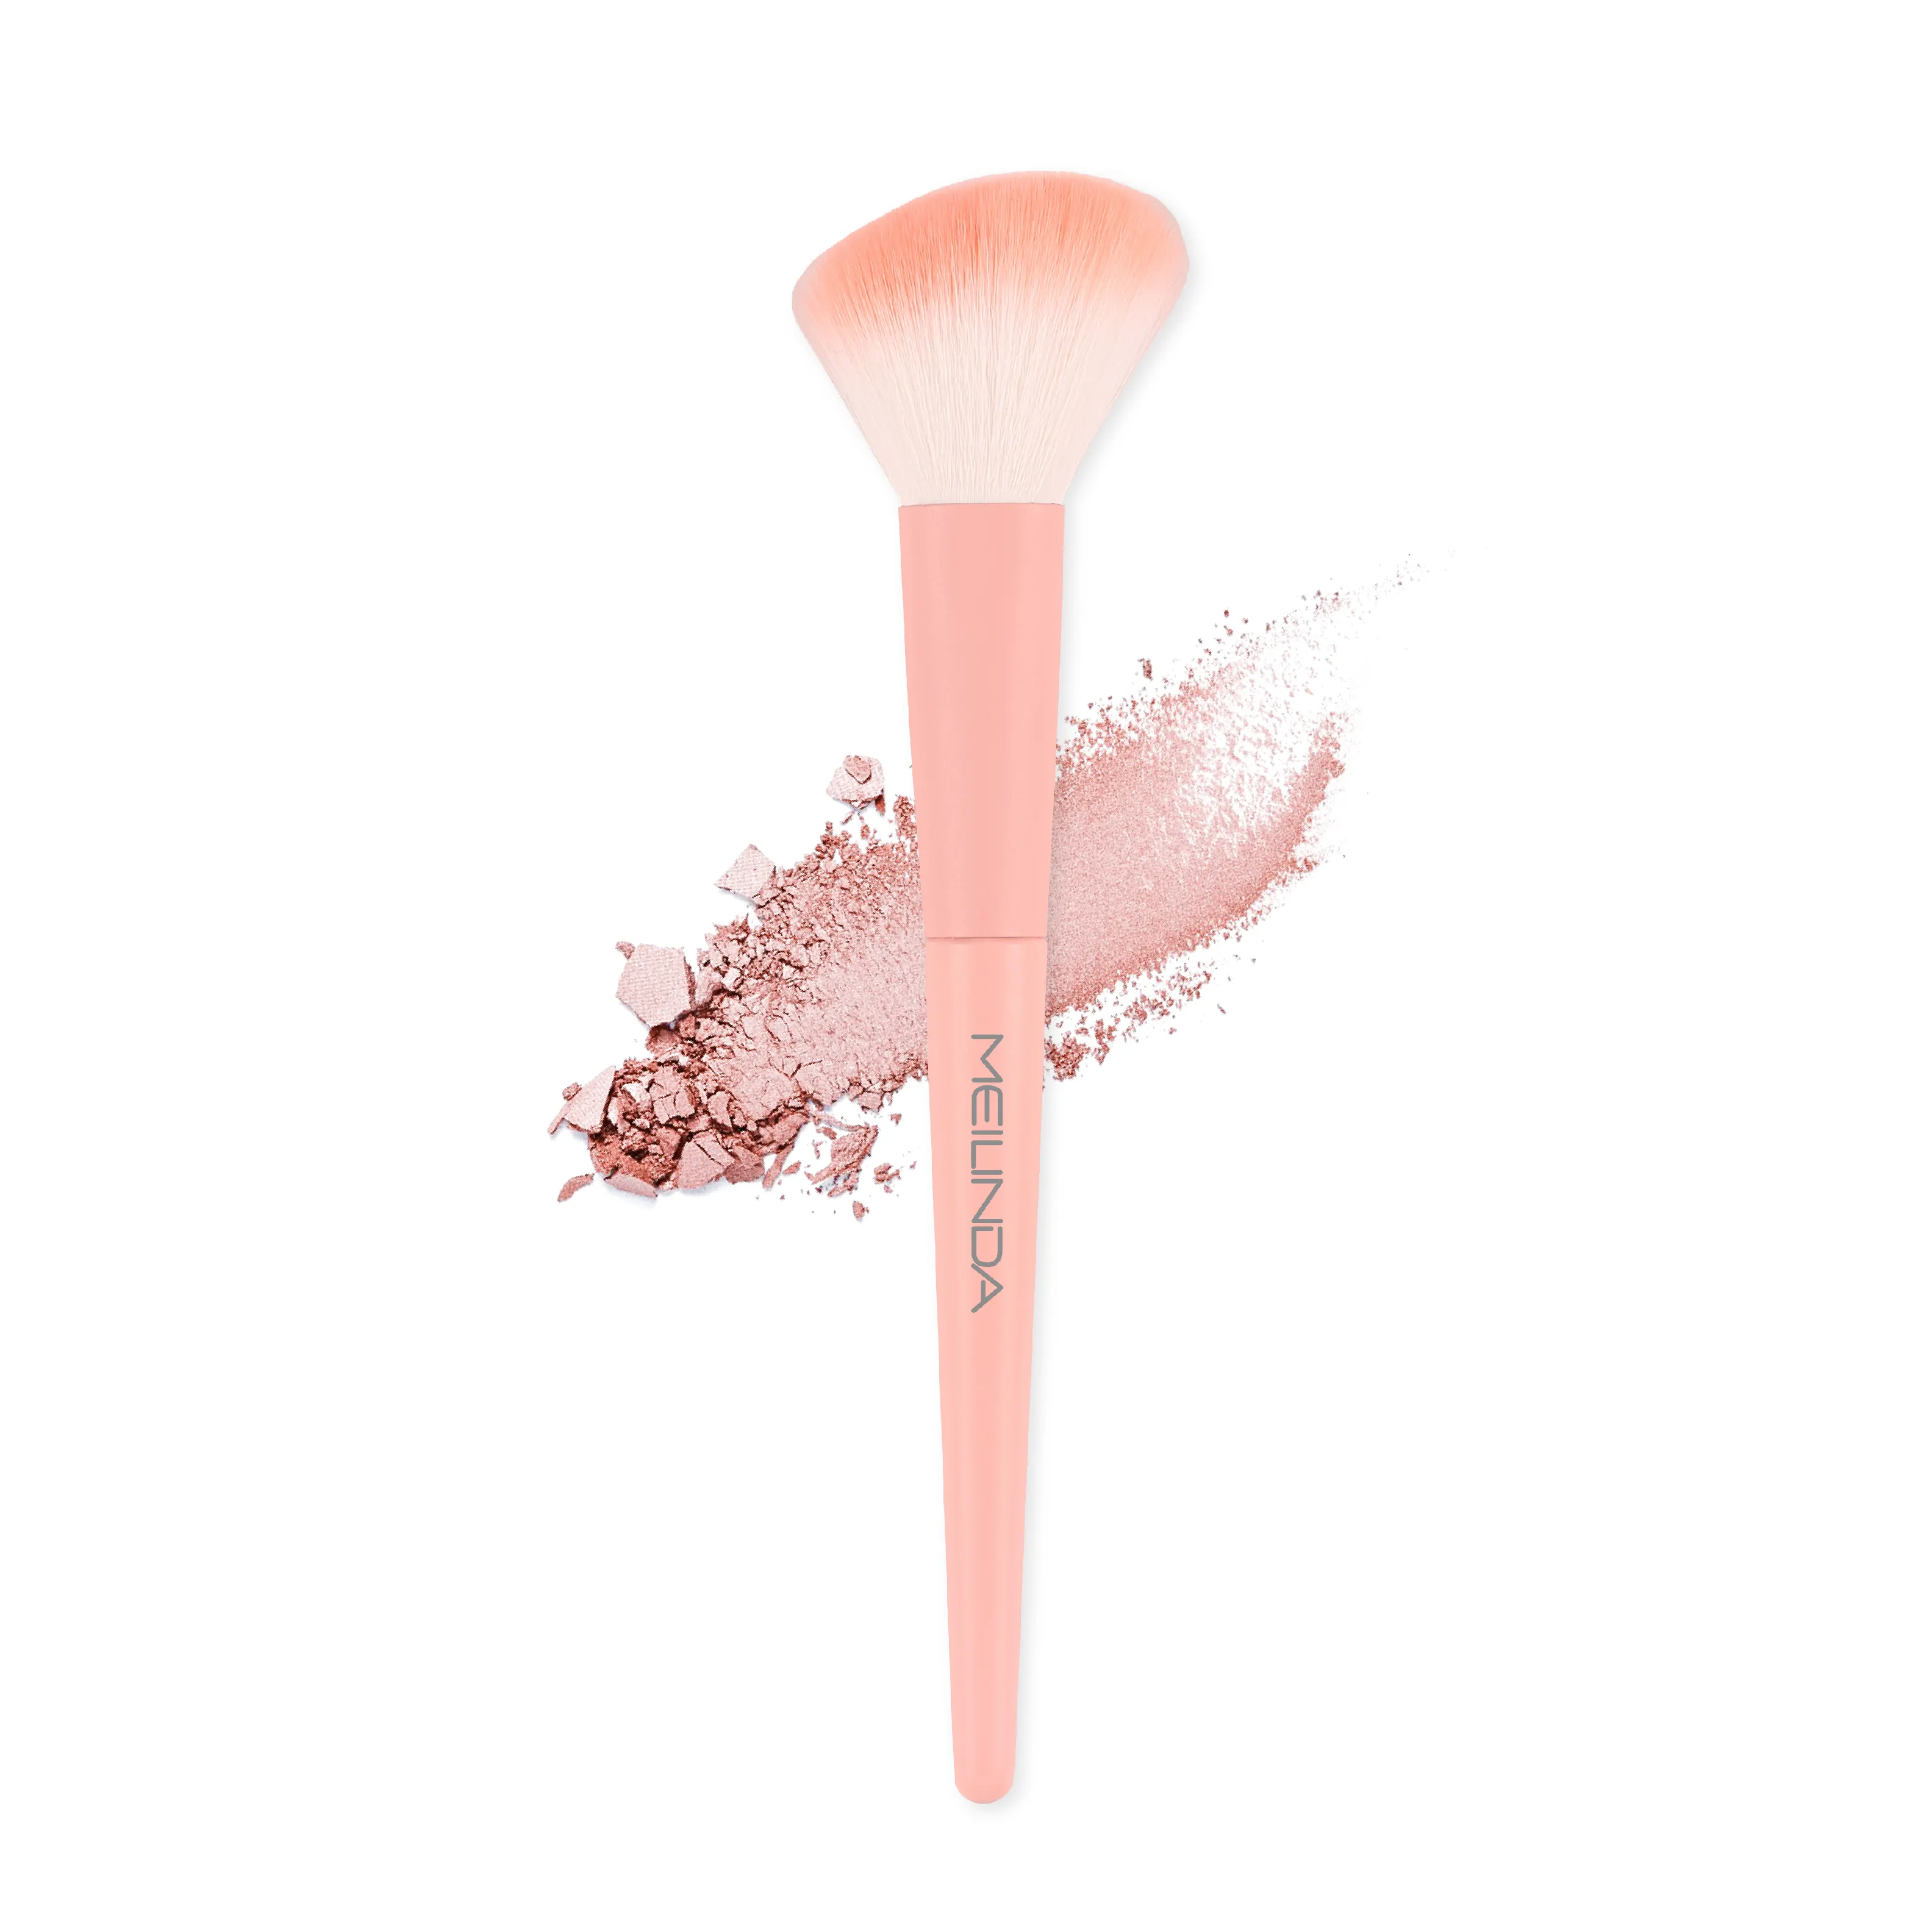 Meilinda Perfect Pastel Contour Angled Blush Brush Makeup Brush Set Home Use Beauty Equipment Best Selling Product from Thailand